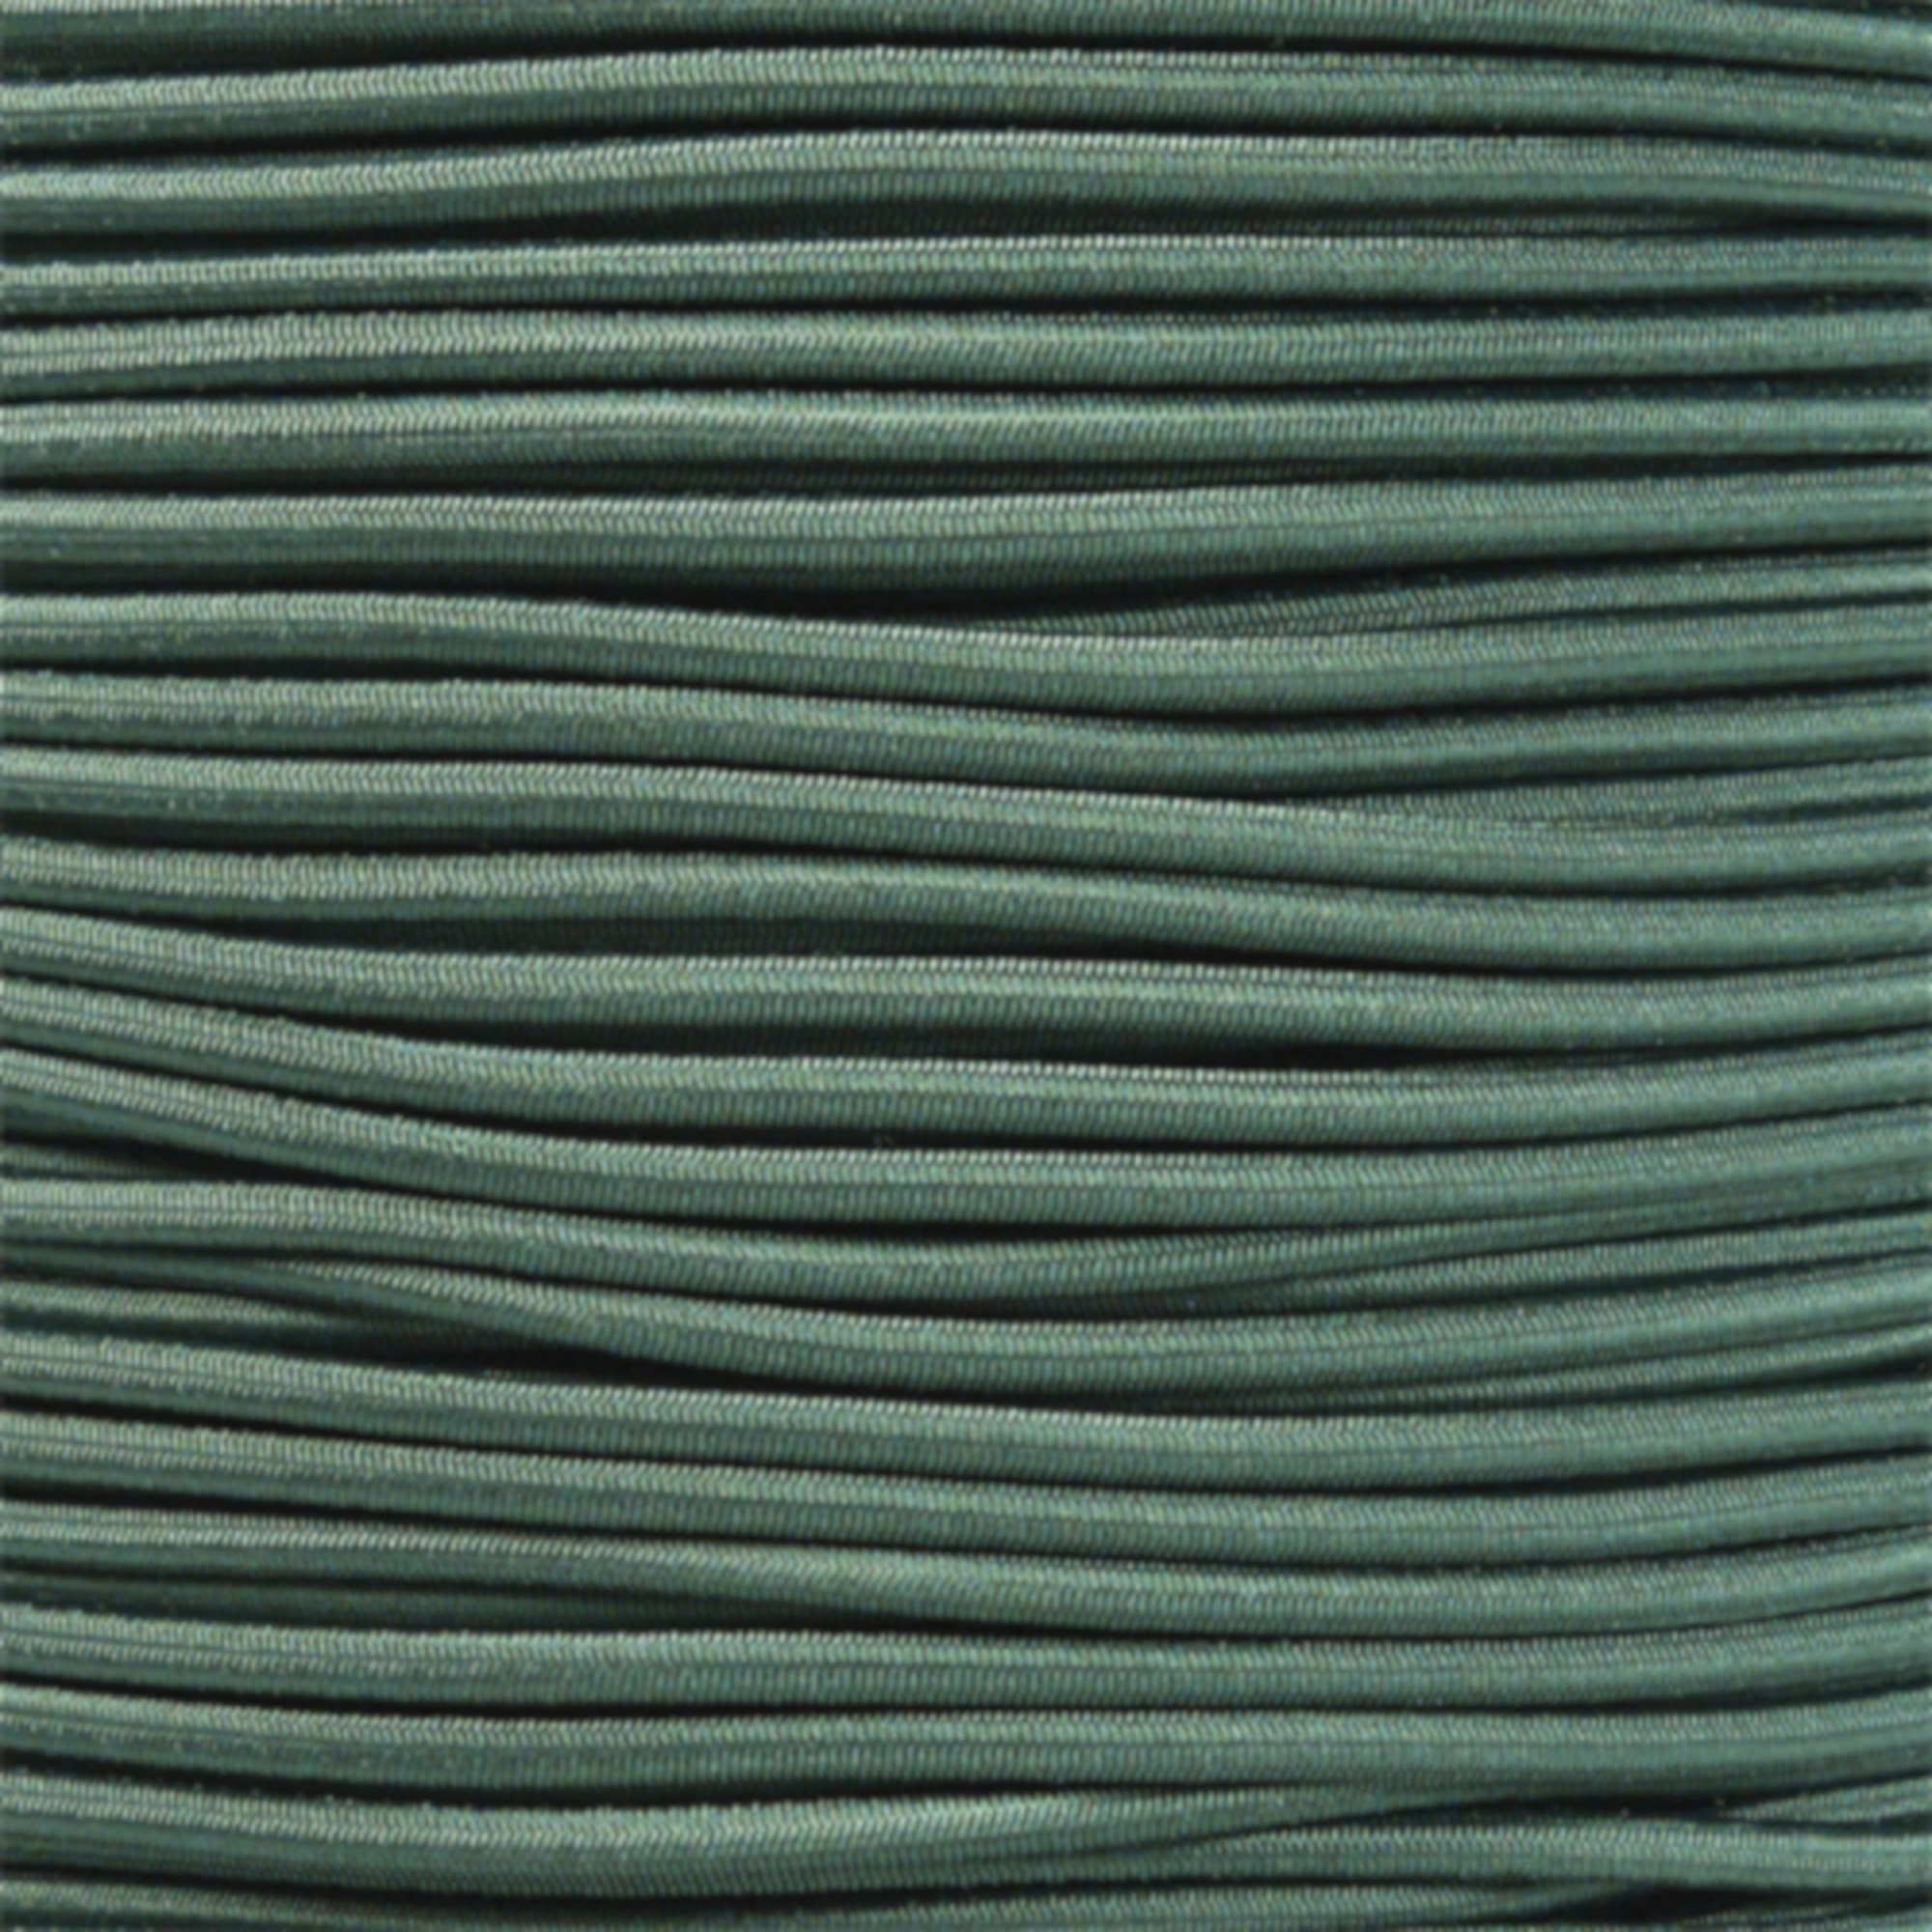 1/8" Shock Cord (Also Known as Bungee Cord) for Replacement, Repair, & Outdoors - Variety of Colors Available in 10, 25, & 50 Foot Lengths - image 1 of 1